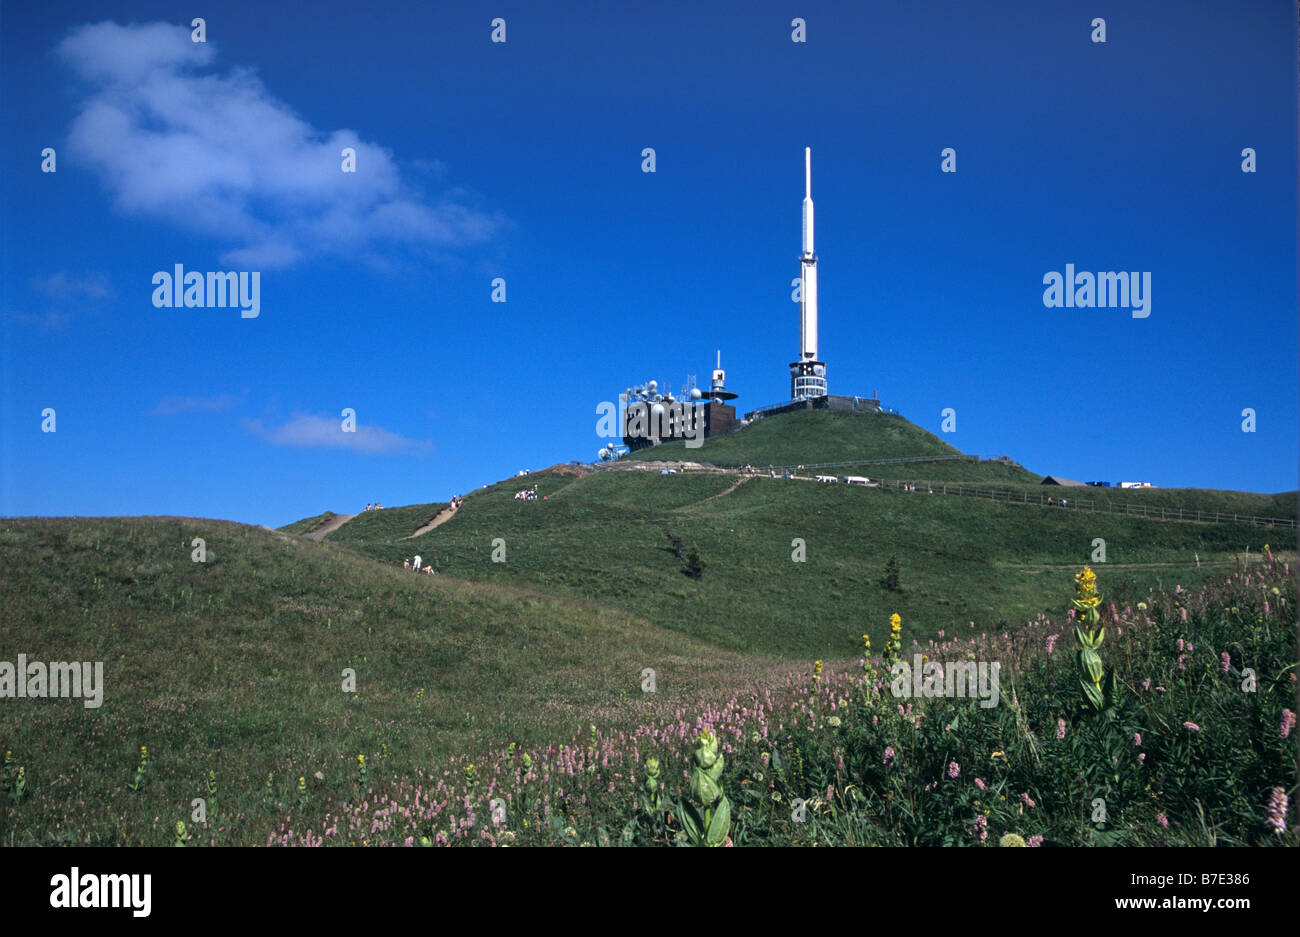 The Puy de Dôme Peak & Extinct Volcano, with Observatory and Telecommunications Tower,  nr. Clermond-Ferrand, Auvergne, France Stock Photo